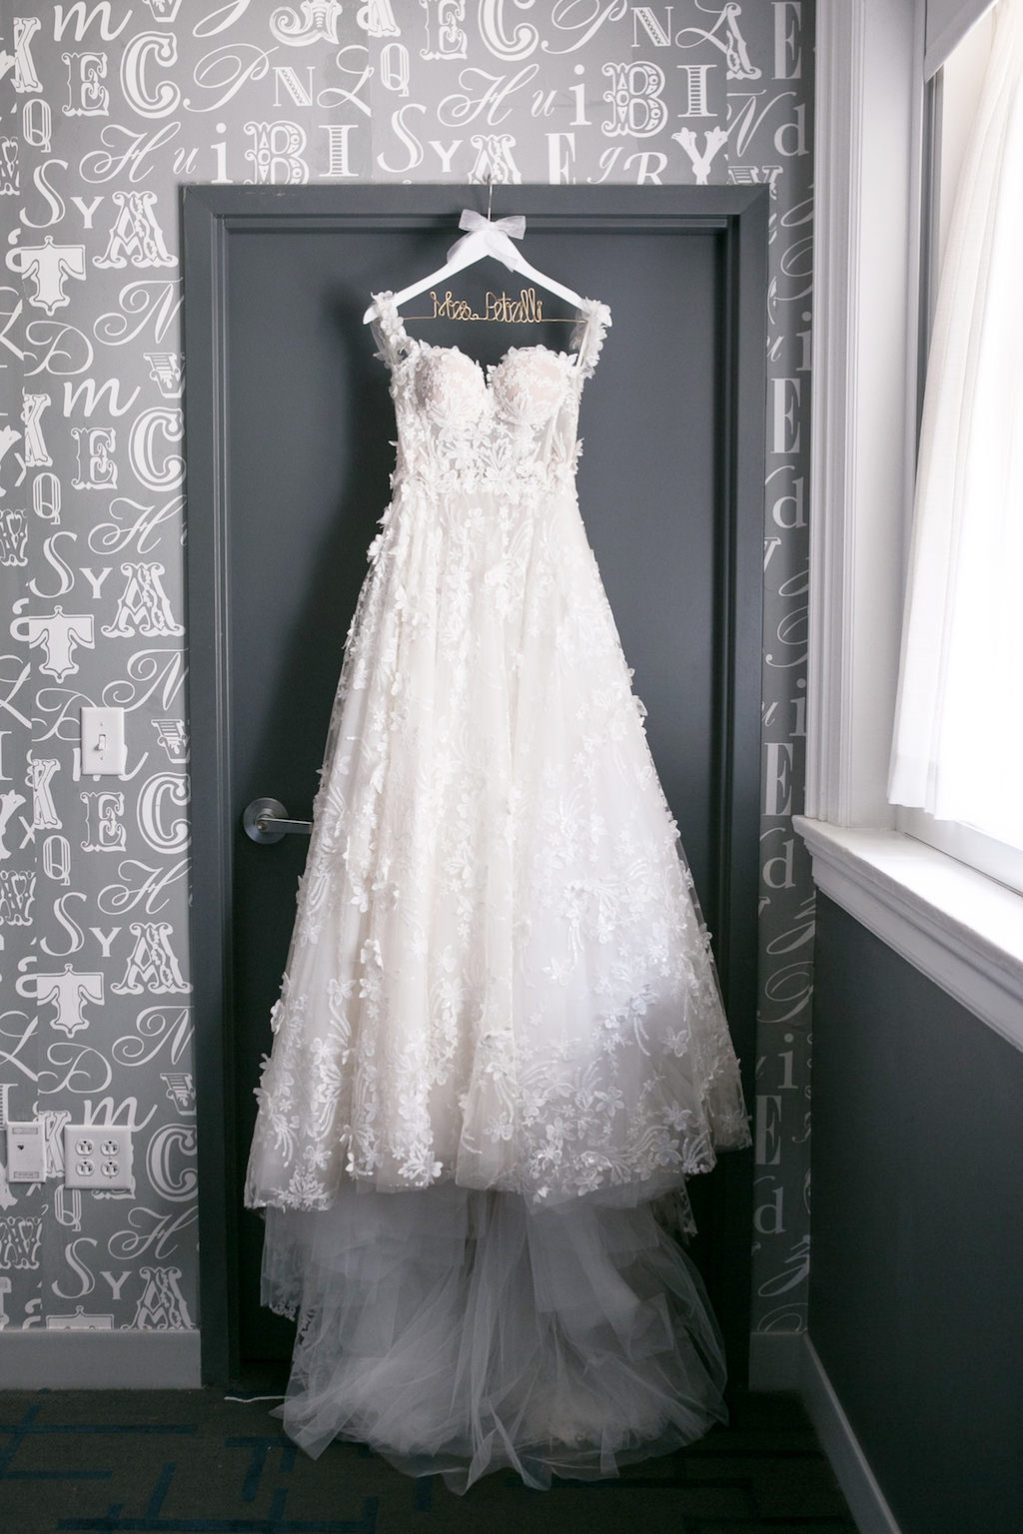 Lace Illusion and Tulle Ballgown Sweetheart Neckline with Straps Romantic Modern Galia Lahav Wedding Dress on Custom White Wooden and Wire Hanger | Tampa Bay Wedding Photographer Carrie Wildes Photography | Tampa Bay Bridal Shop Isabel O'Neil Bridal Collection